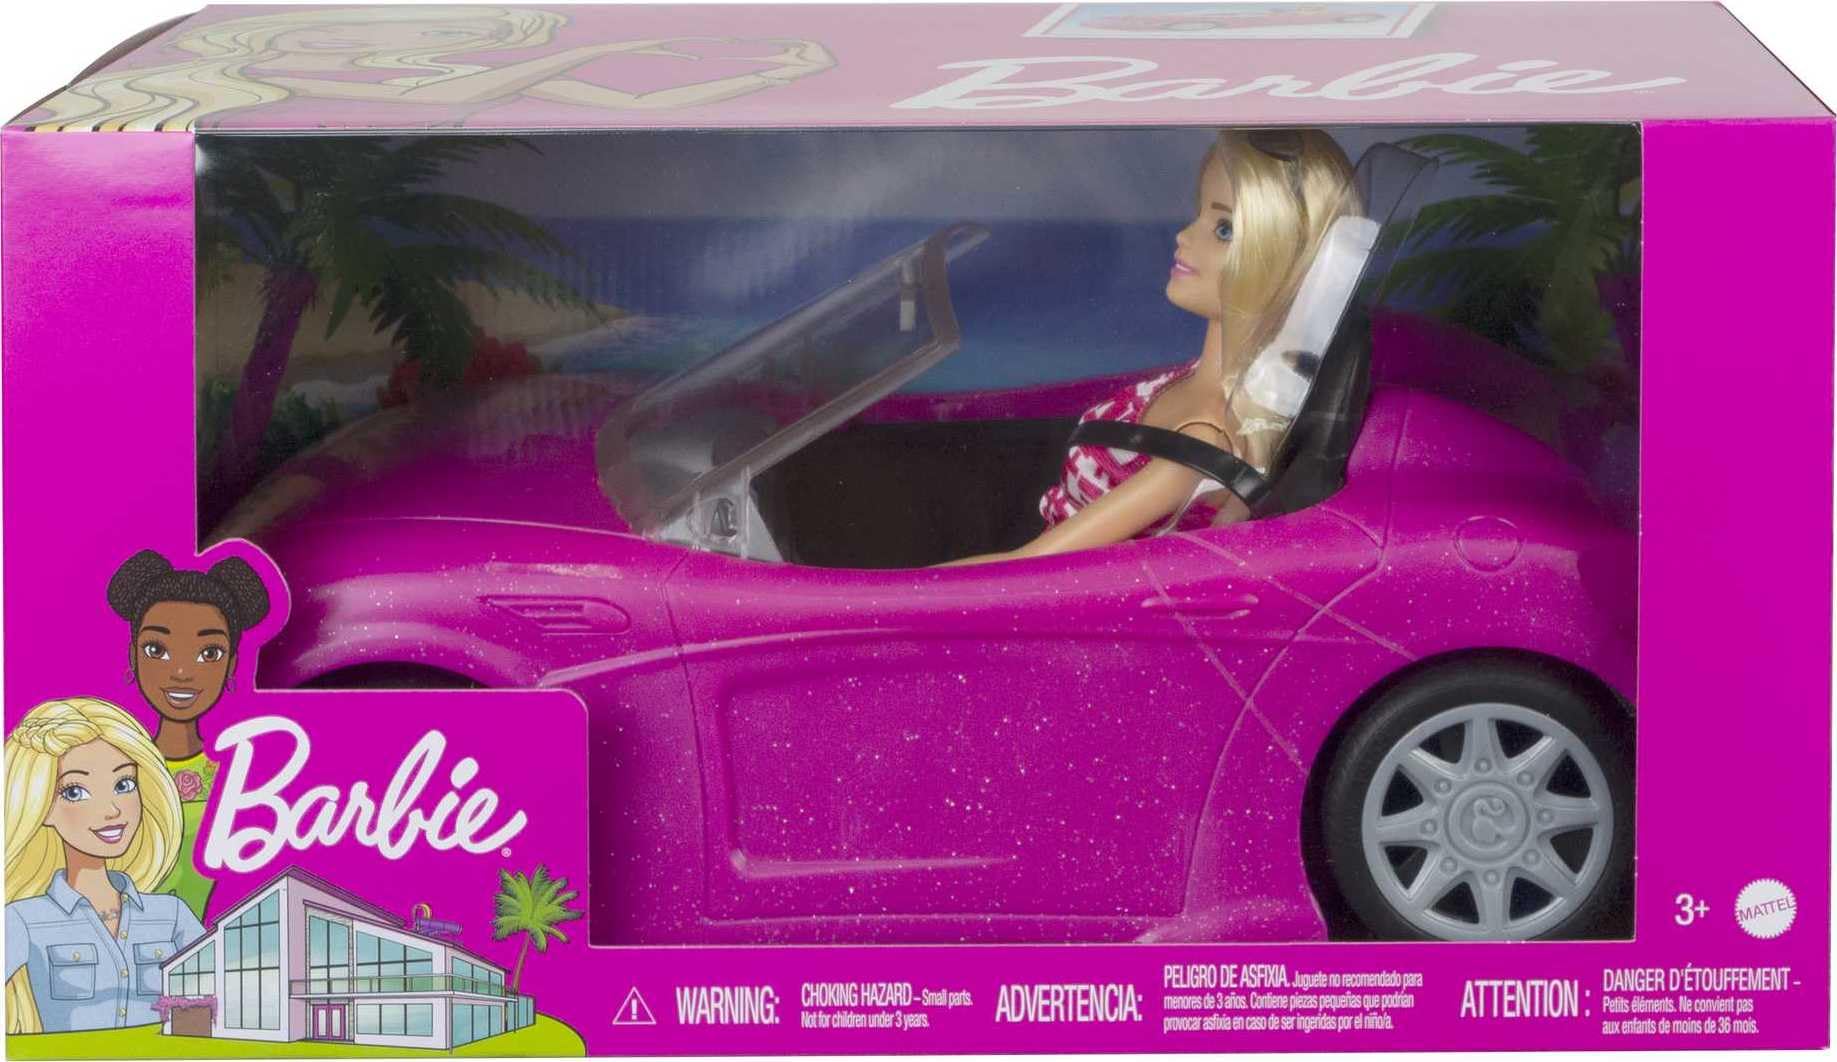 Barbie Car and Doll Set, Sparkly Pink 2-Seater Convertible with Glam Details, Doll in Sundress and Sunglasses (Amazon Exclusive)